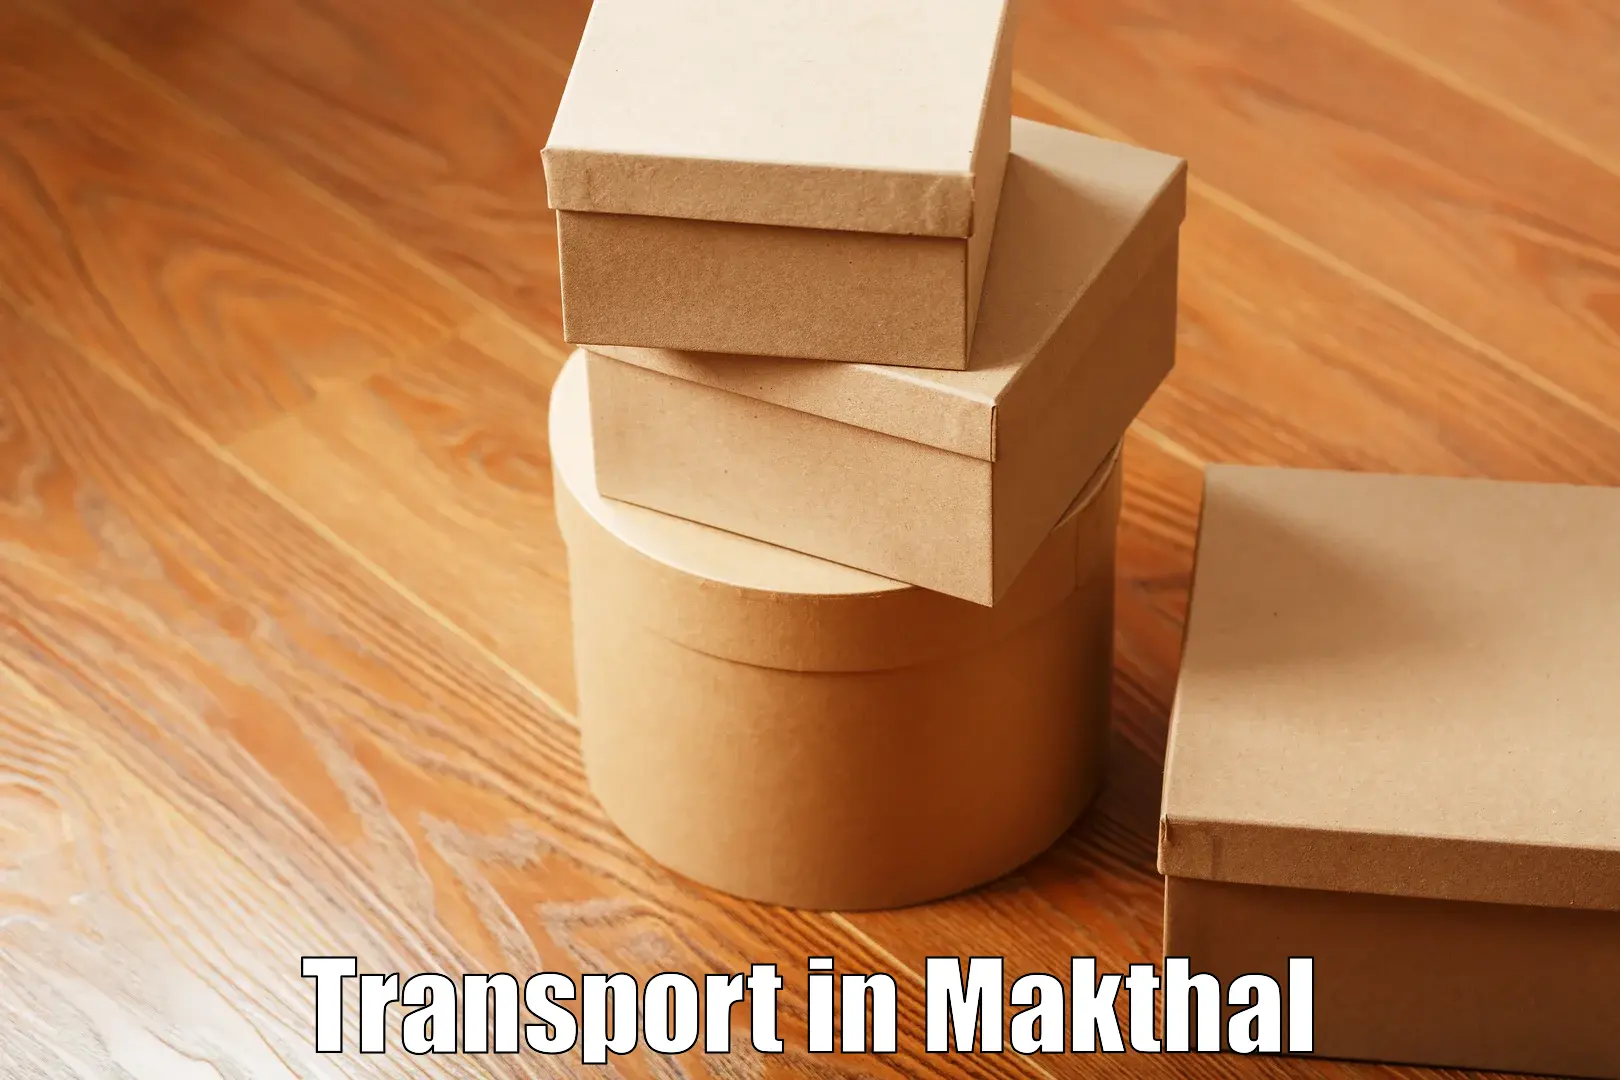 Luggage transport services in Makthal